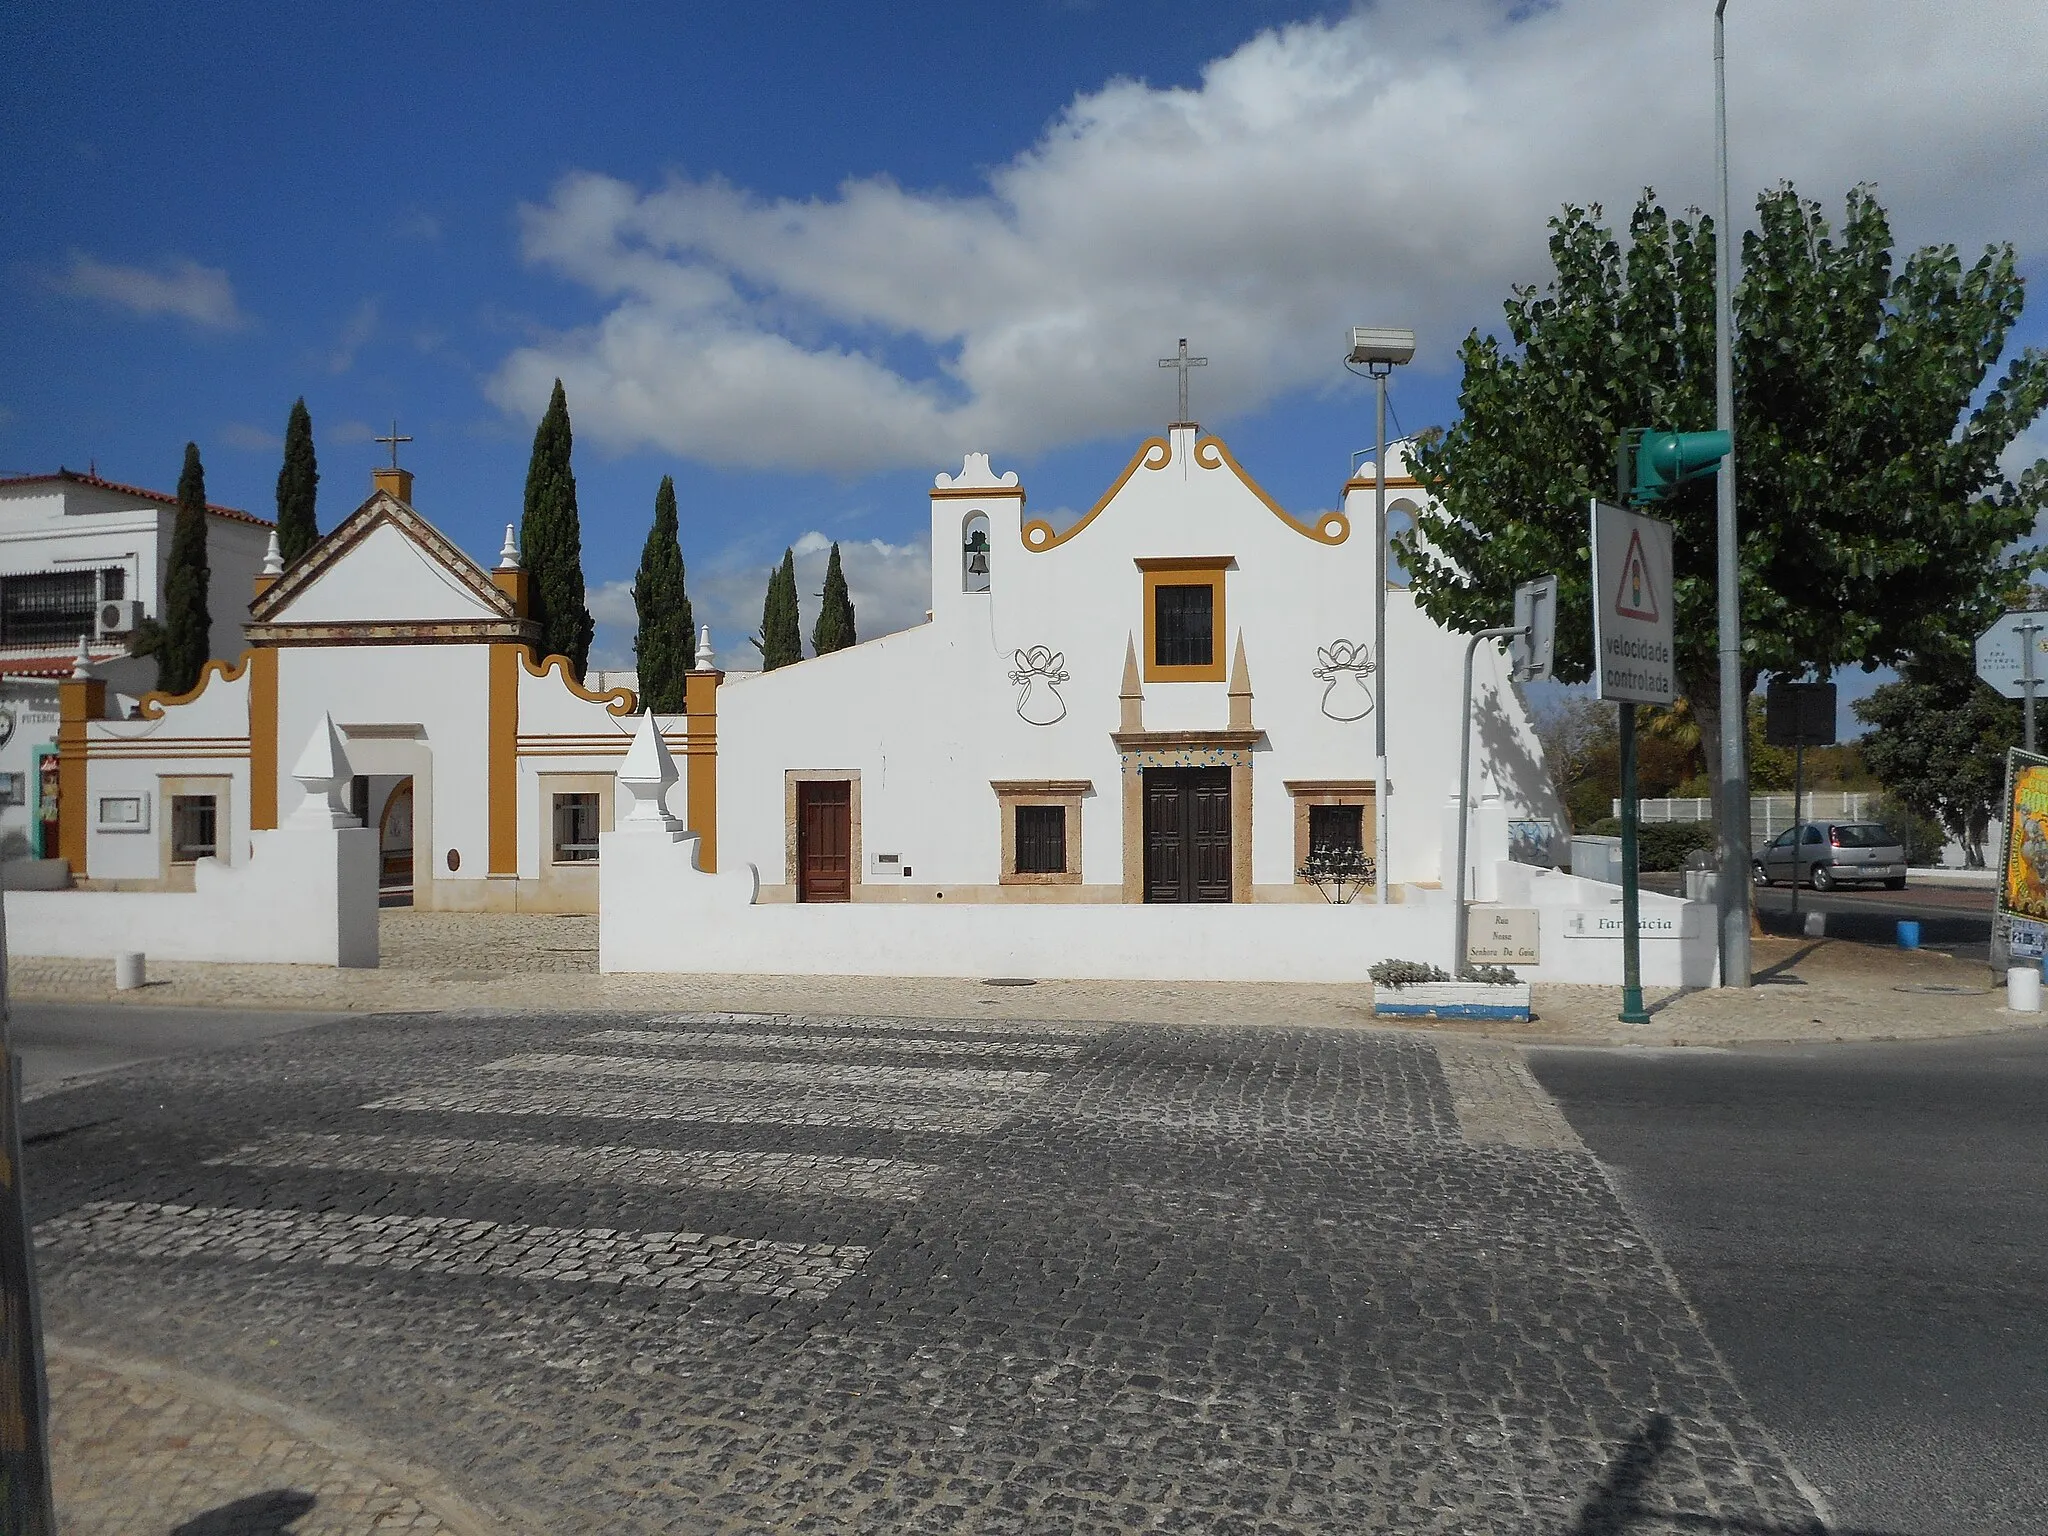 Photo showing: Capela de Nossa Senhora da Guia is located on the Rua da Liberdade within the  town of Guia, Algarve, Portugal. There is evidence to show that there has been a place of worship located here before the 16 century. The church that stood here before 1755 was badly damaged and much of it collapsed during the 1755 earthquake. Since then the building has been rebuilt and altered to the building seen today. It is considered to be a good example of ecclesiastical architecture of the Baroque Period in the Algarve.